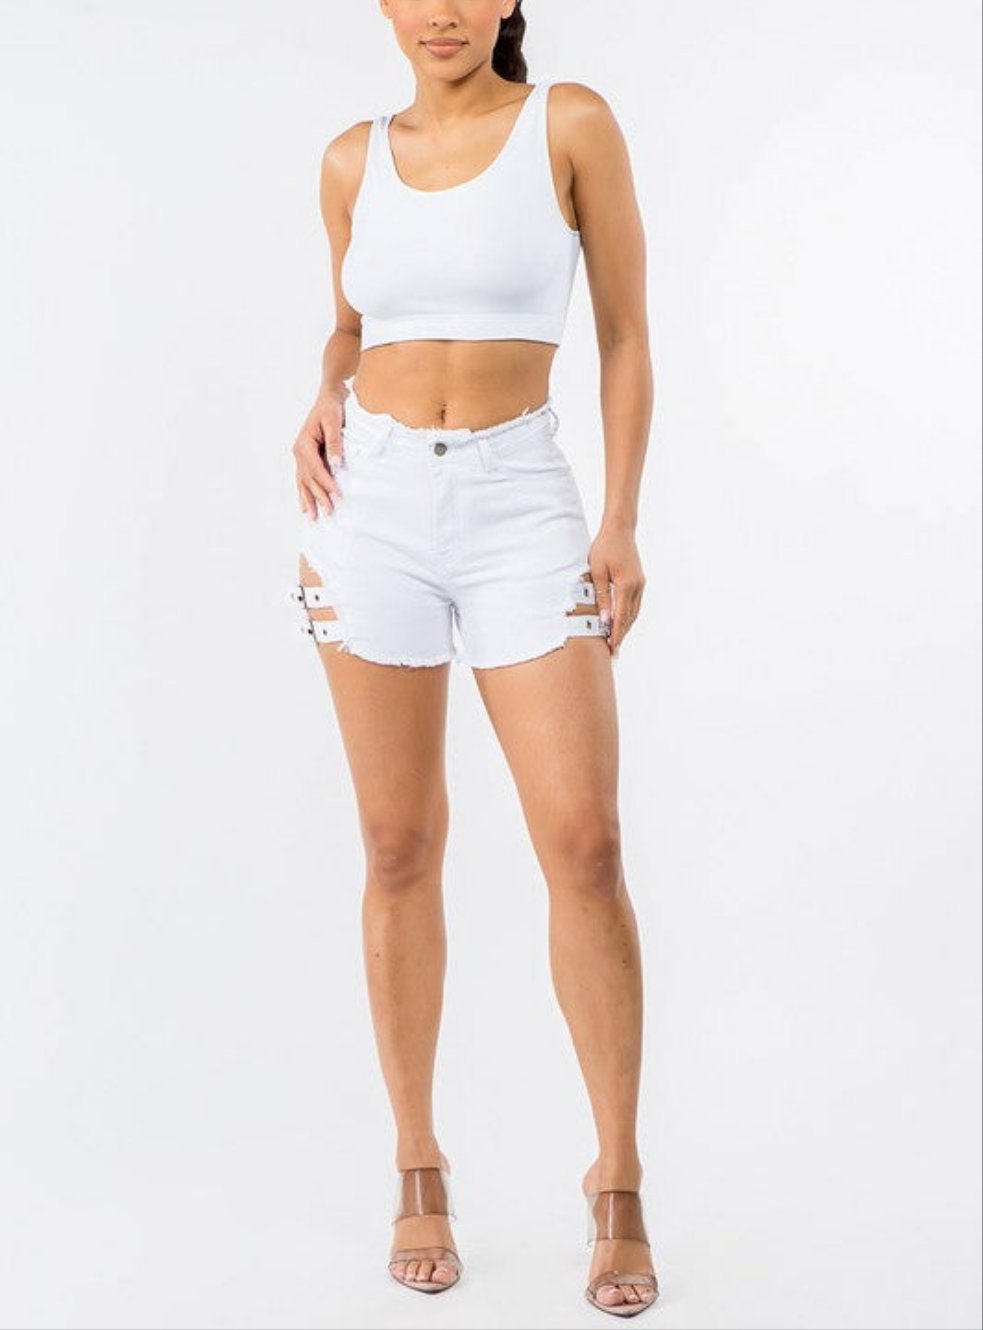 HIGH WAIST CUT OUT SHORTS WITH BUCKLES